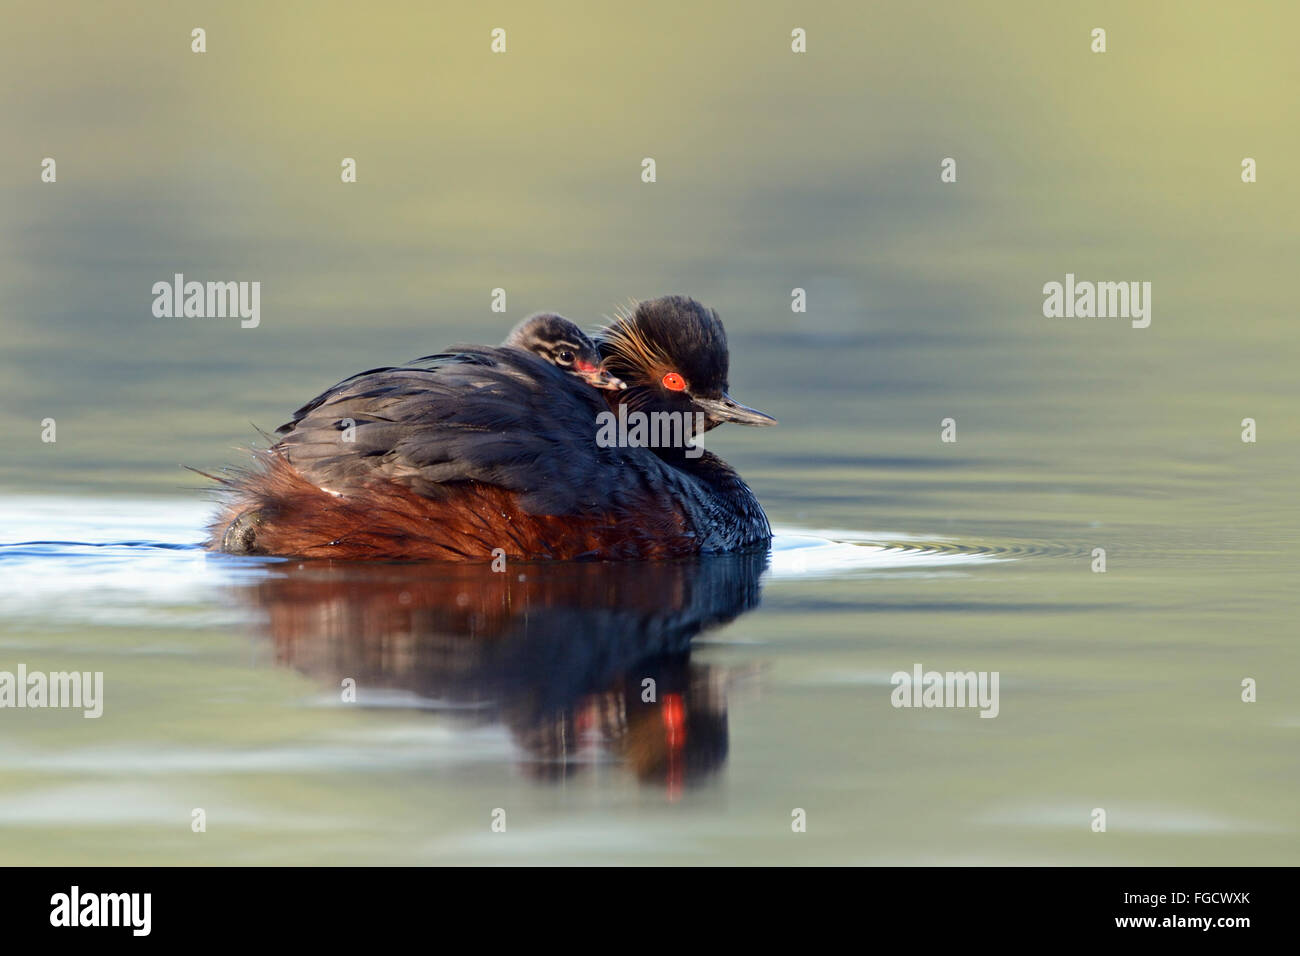 Black-necked Grebe / Eared Grebe ( Podiceps nigricollis ), carrying its chick, gathering a hatchling on its back. Stock Photo